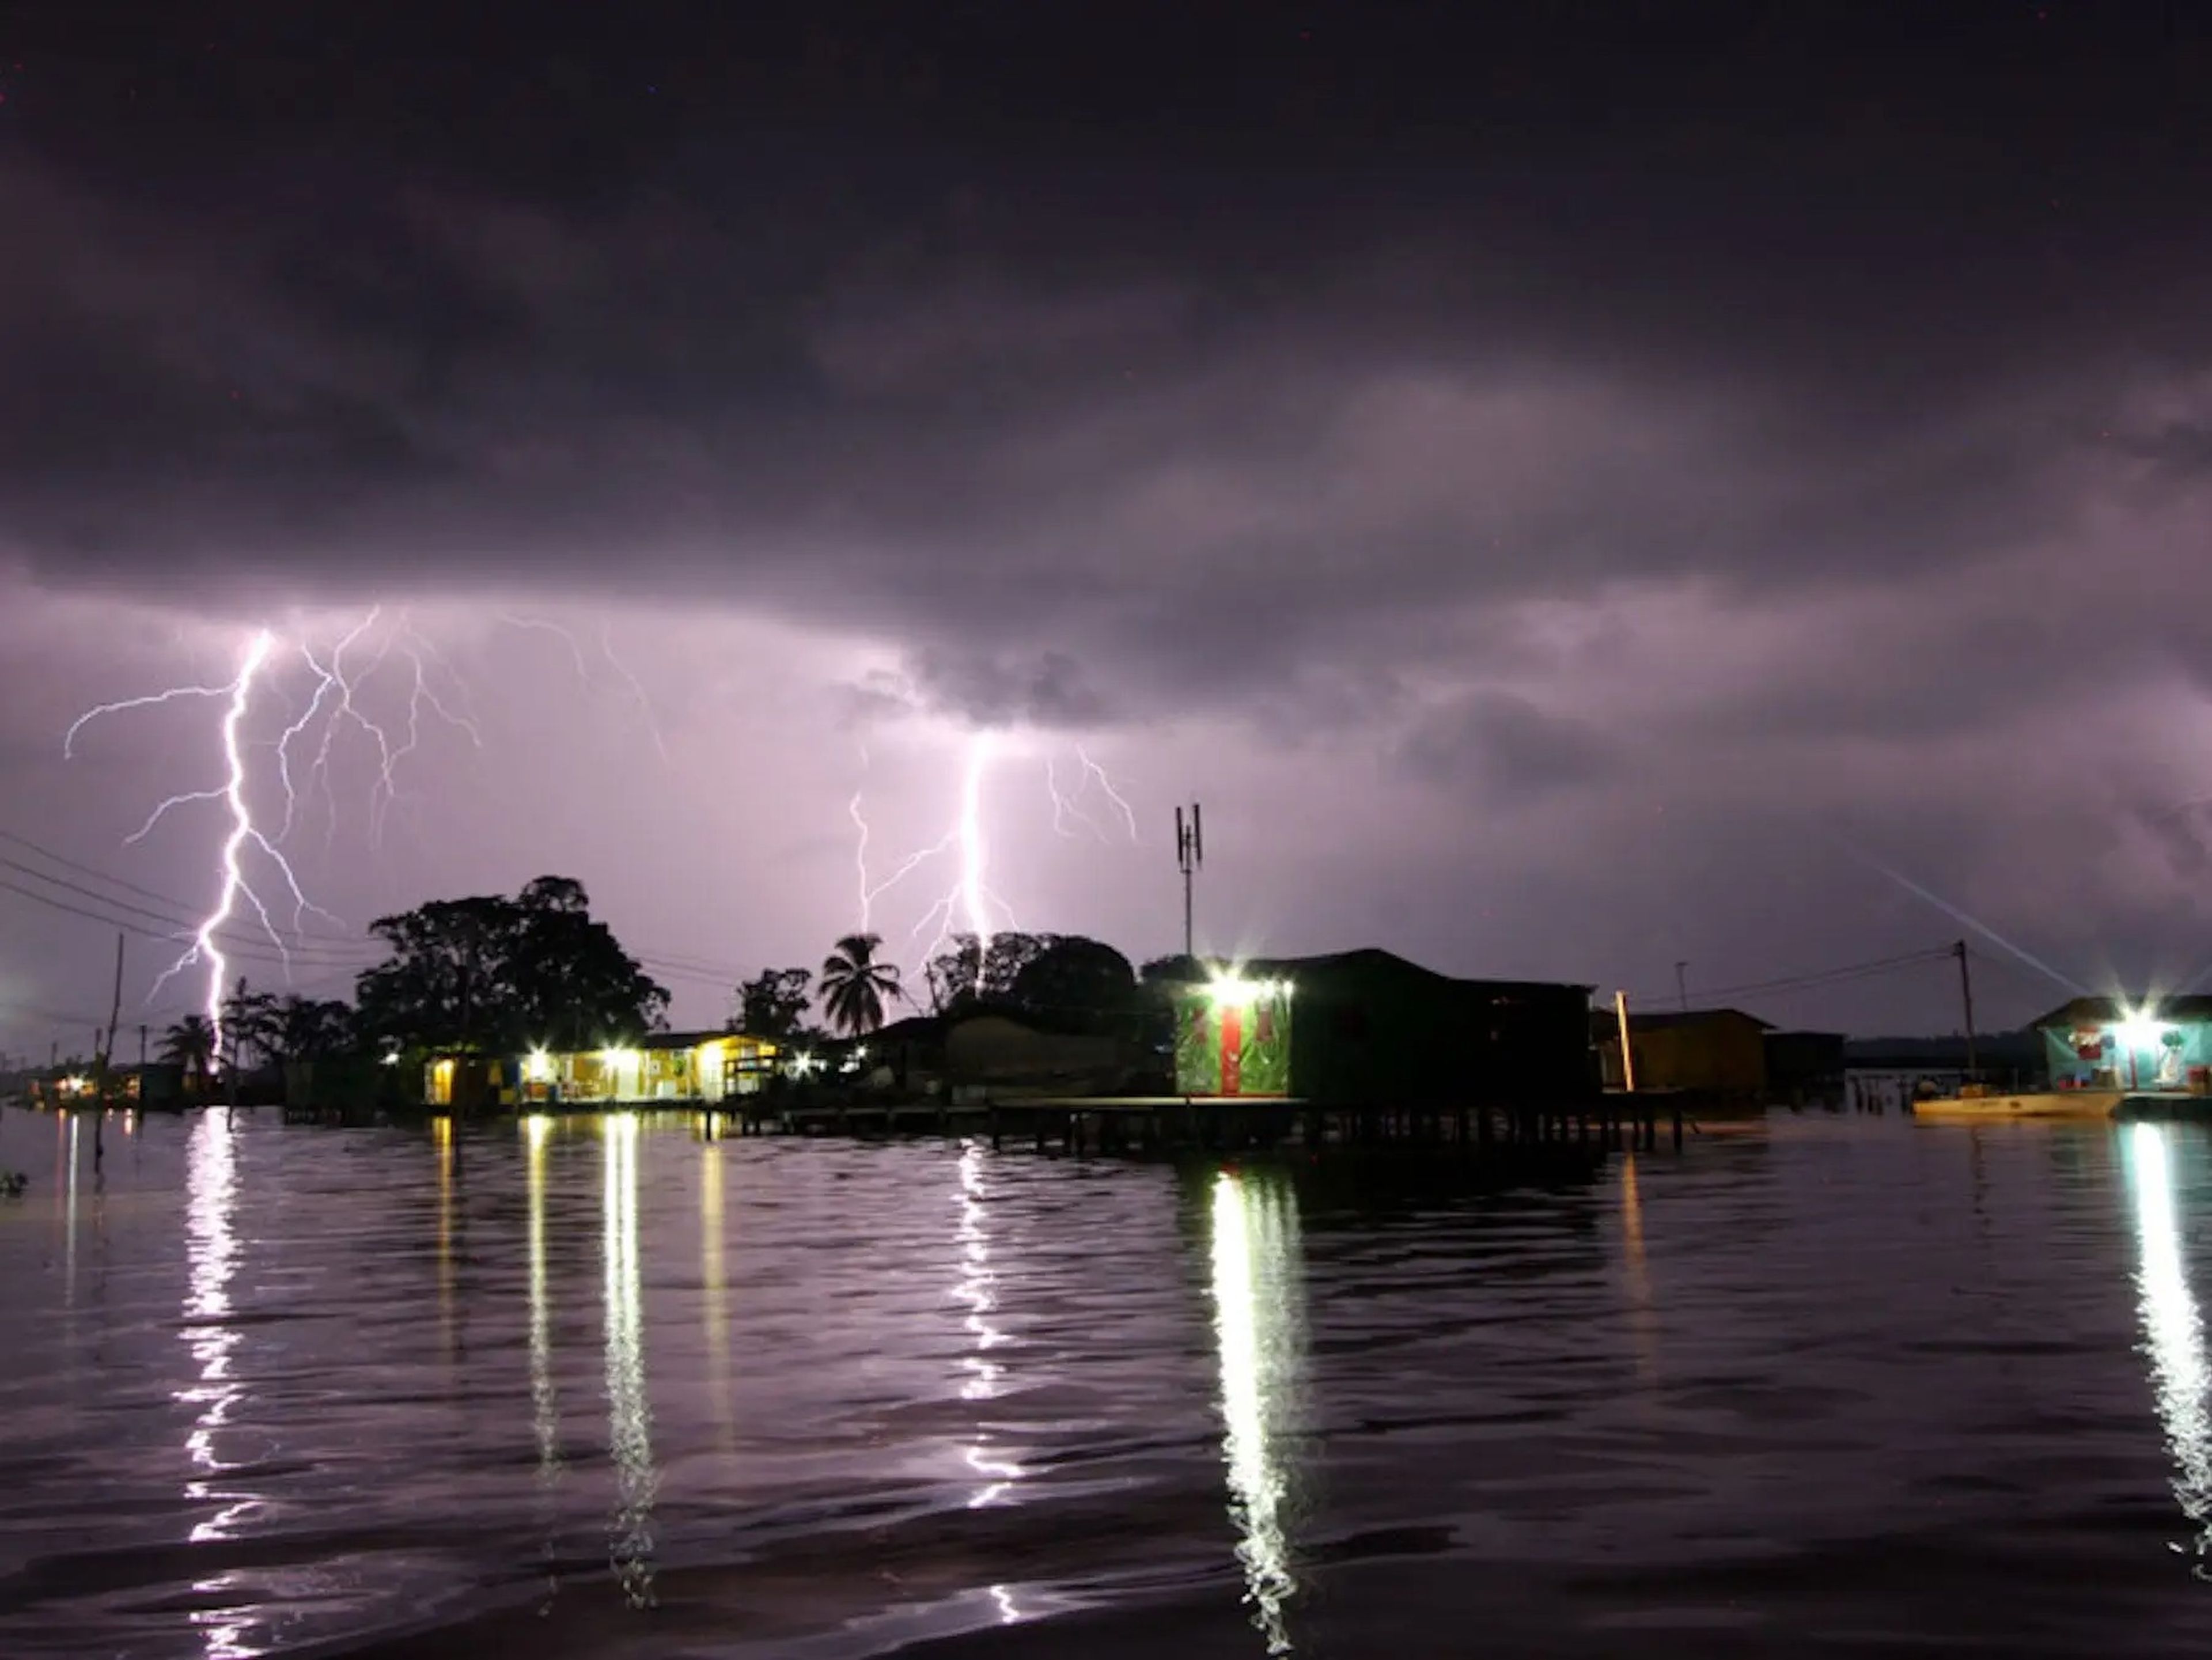 A picture of a lake-side town at night showered by several lightning bolts at once in Maracaibo.